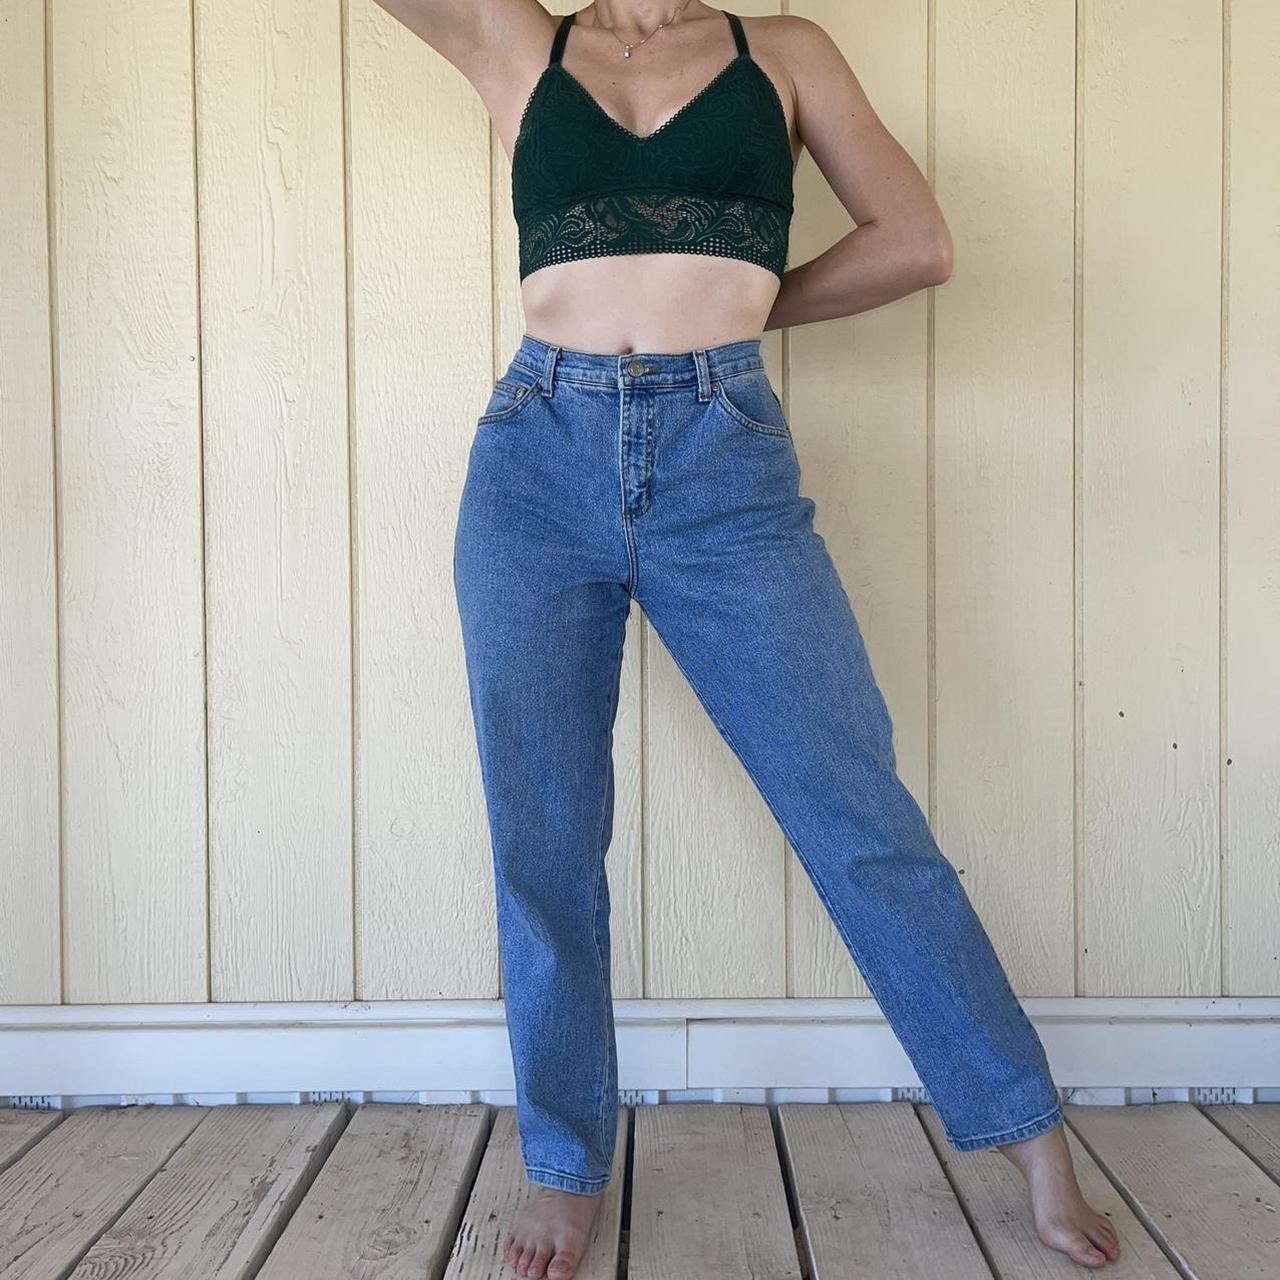 29, Vintage Faded Glory Jeans, High Waisted Jeans, Light Wash Jeans, Mom  Jeans, Cotton Jeans, 90s 00s Jeans, Size 10, Waist 29 X in 27, W036 -   UK